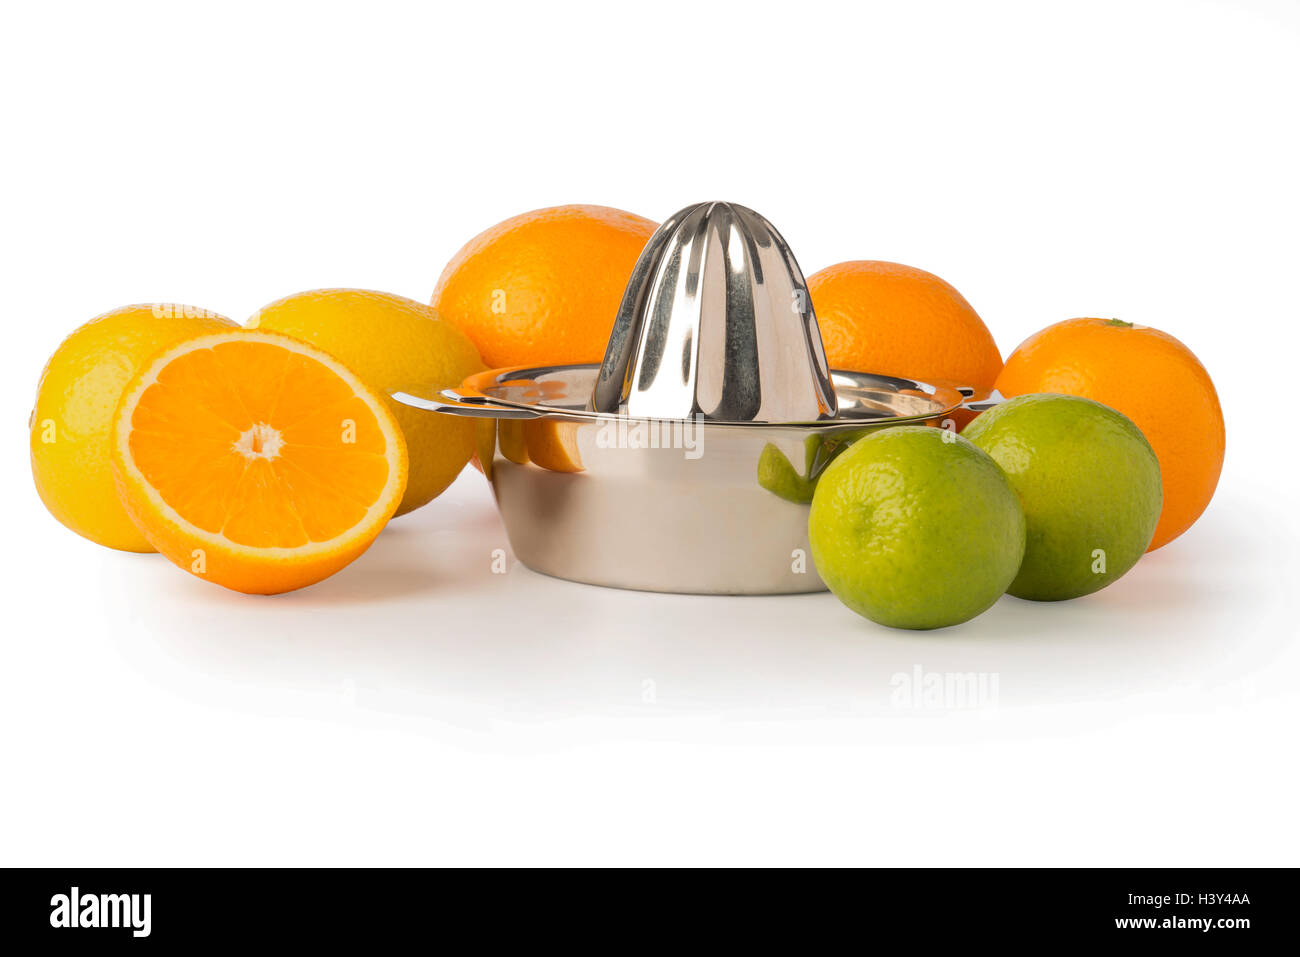 Cutout of a stainless steel orange or citrus hand juicer surrounded by whole lemons, oranges, lime, and half an orange. Stock Photo